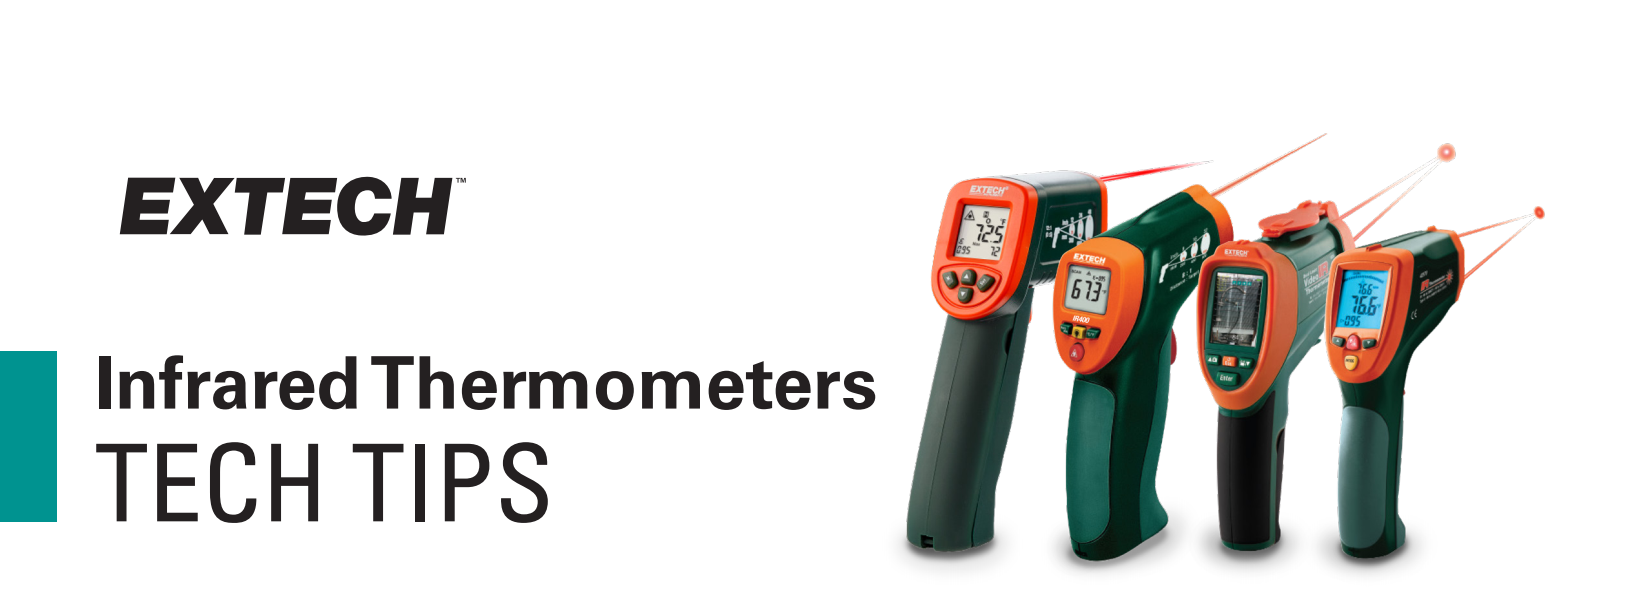 Thermometers, Field and Wildlife Management Supplies